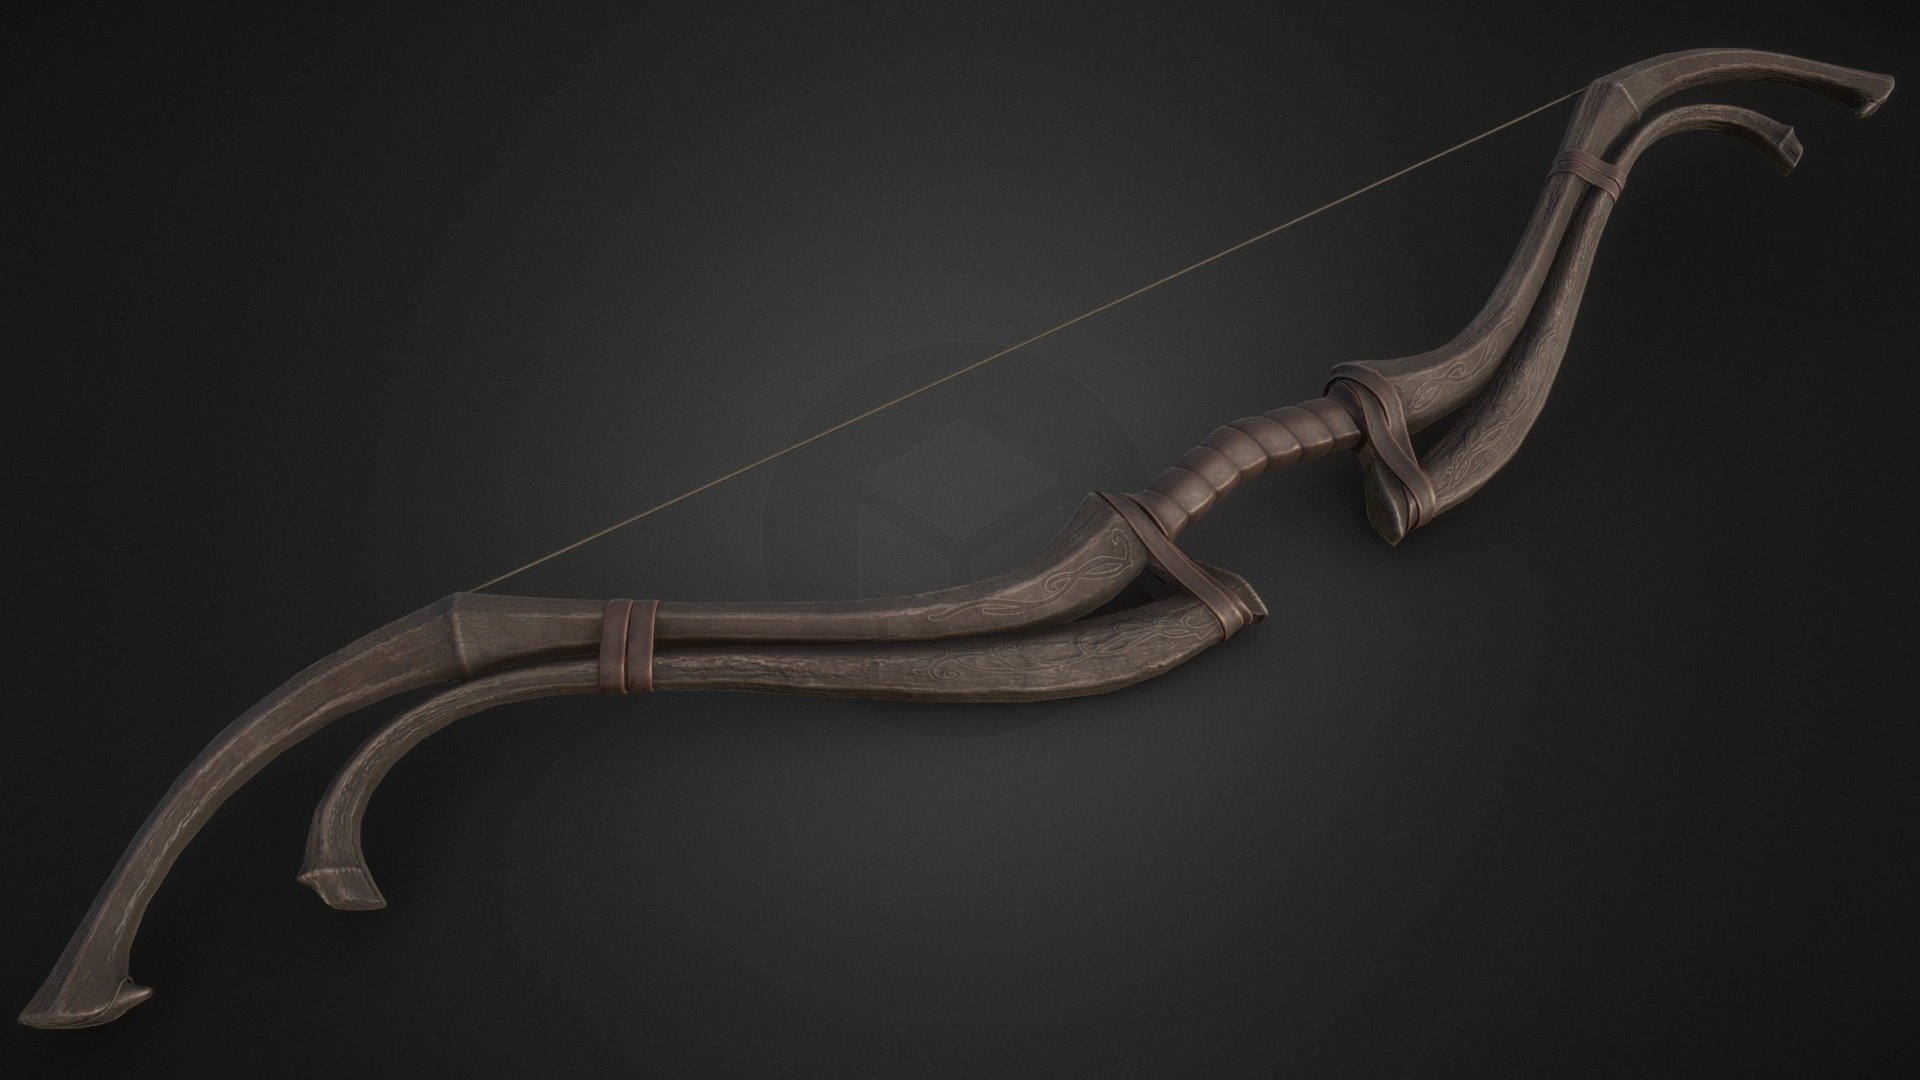 Old bow low poly model.

2k textures. (512 bowstring) Total polycount 8316 tris.

Model created on Blender and ZBrush. Textured with Substance Painter 3d model